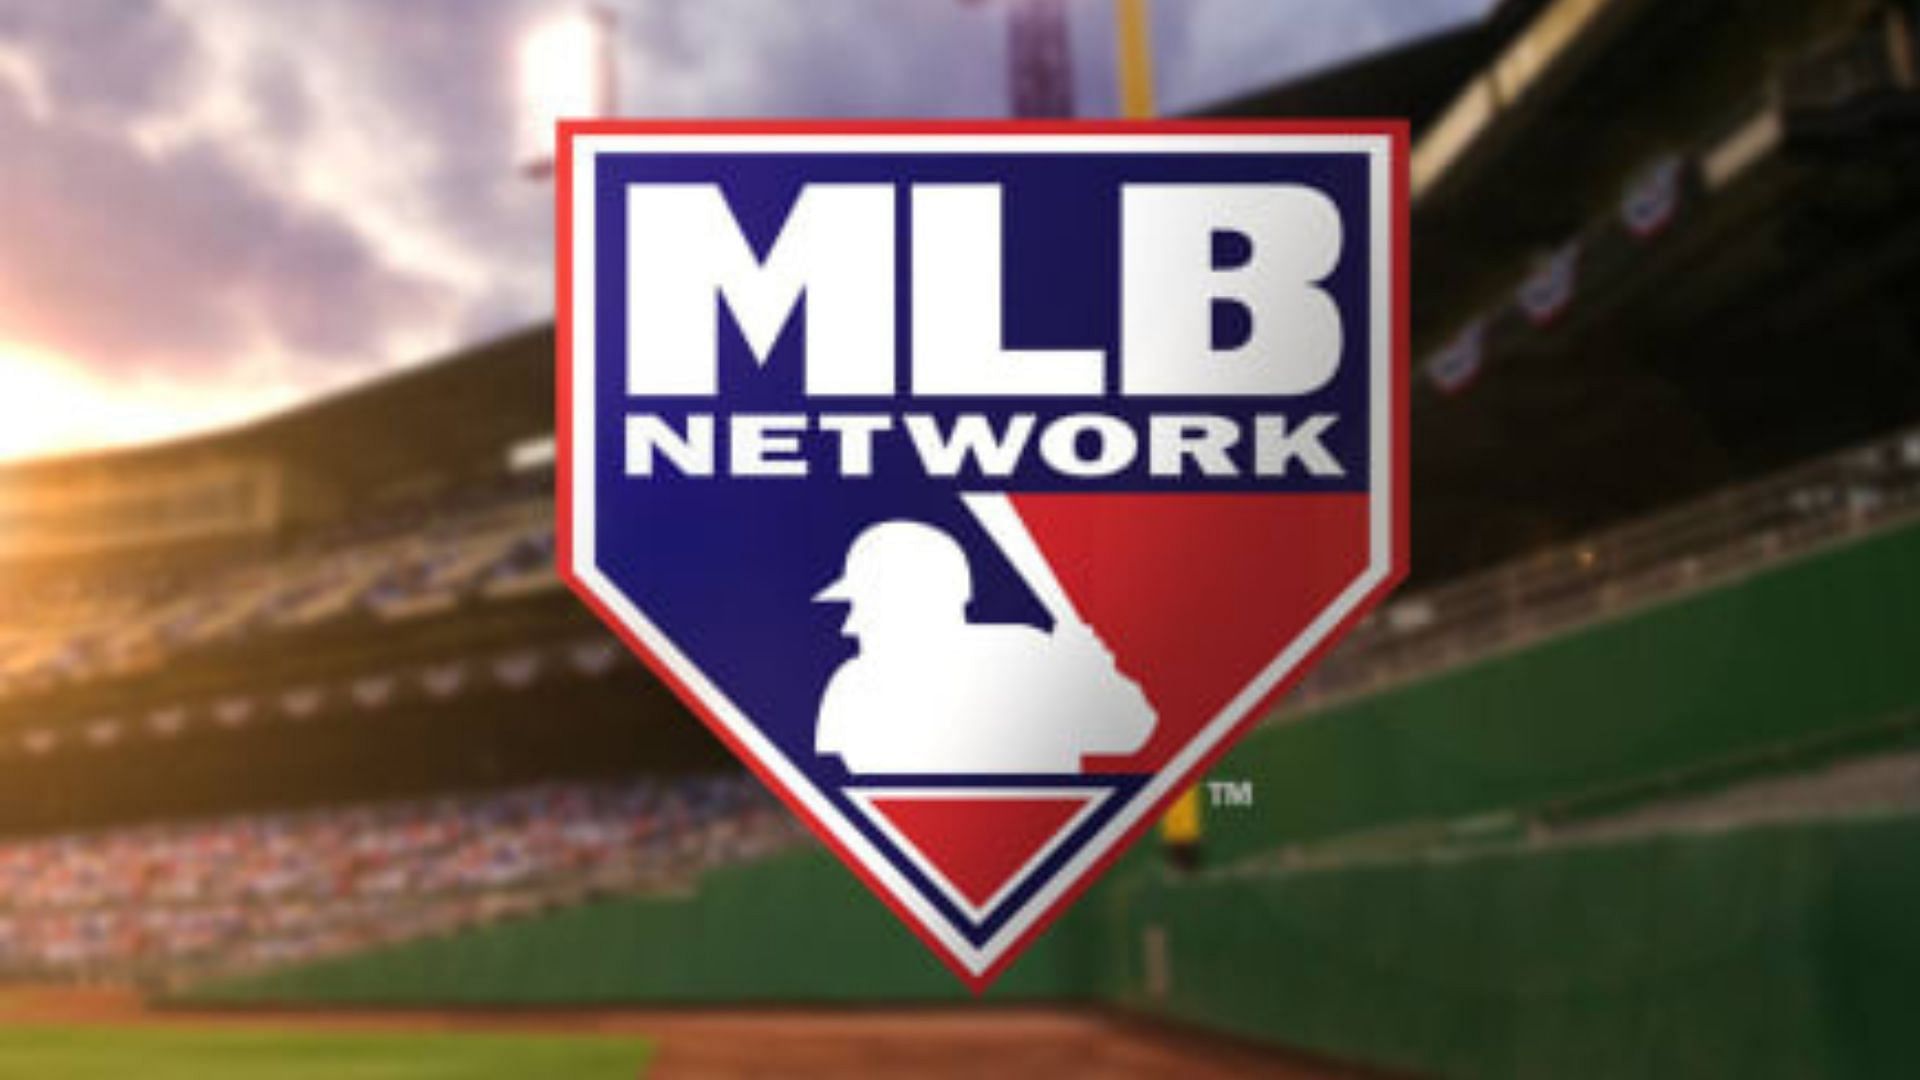 mlb network on streaming services